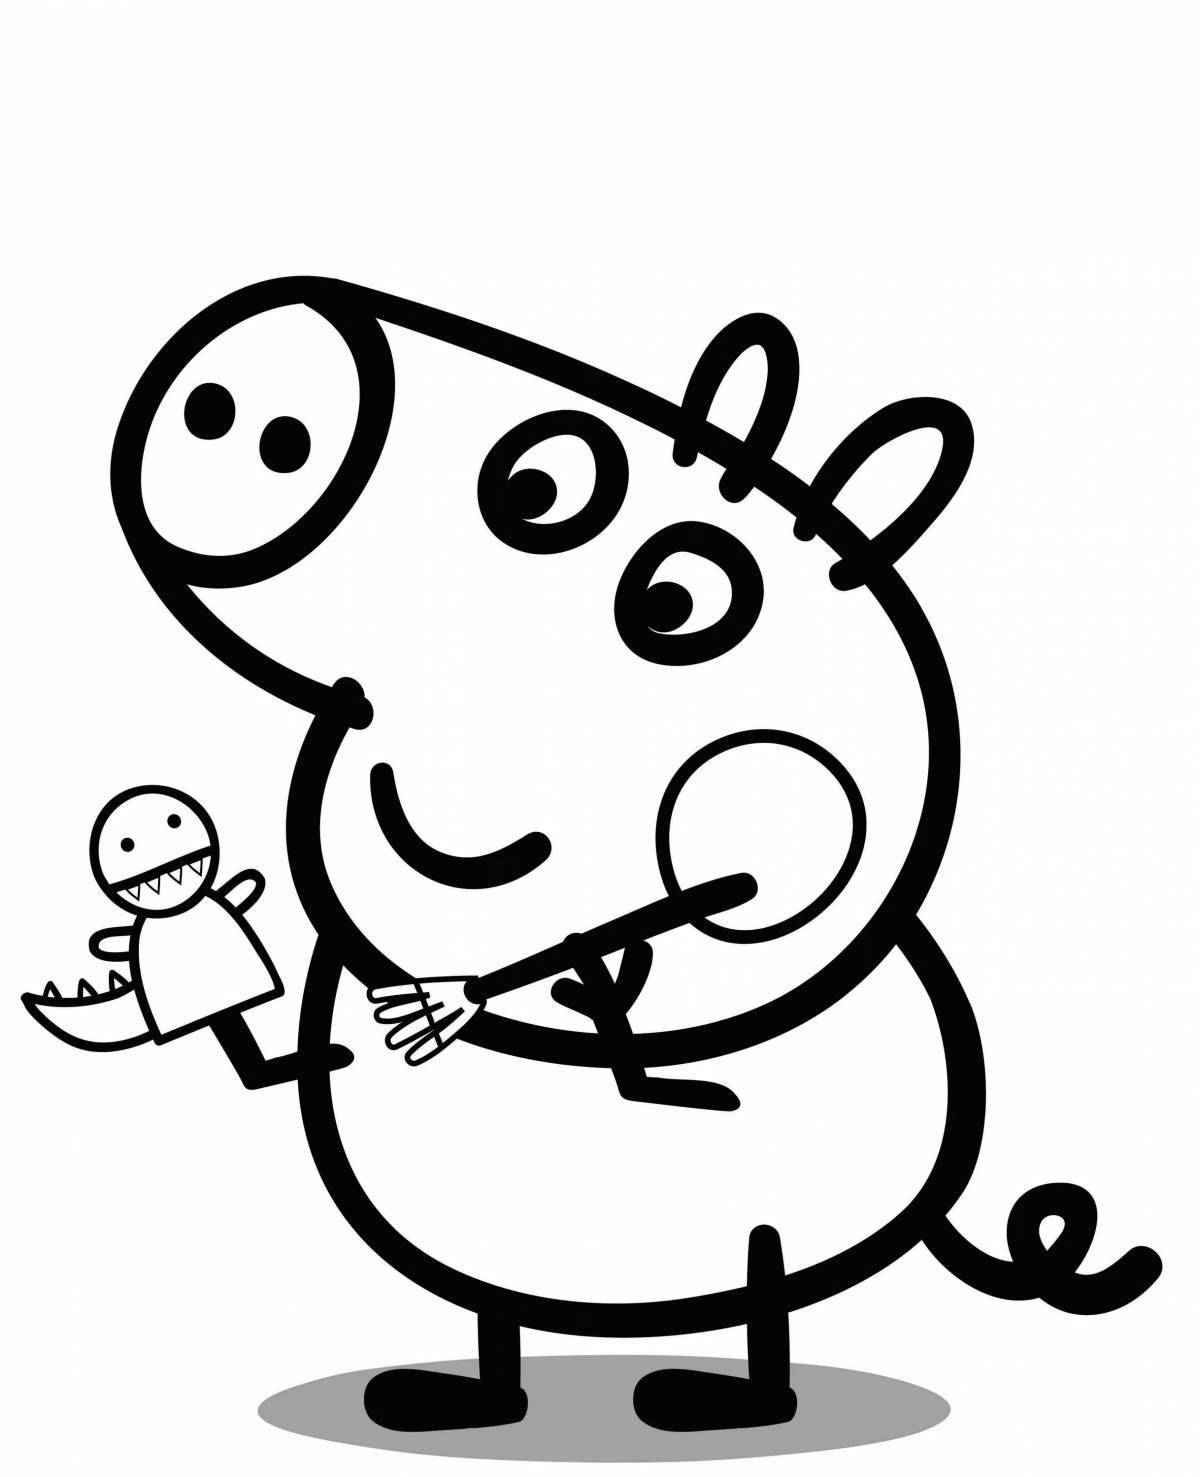 Bright george and peppa coloring book